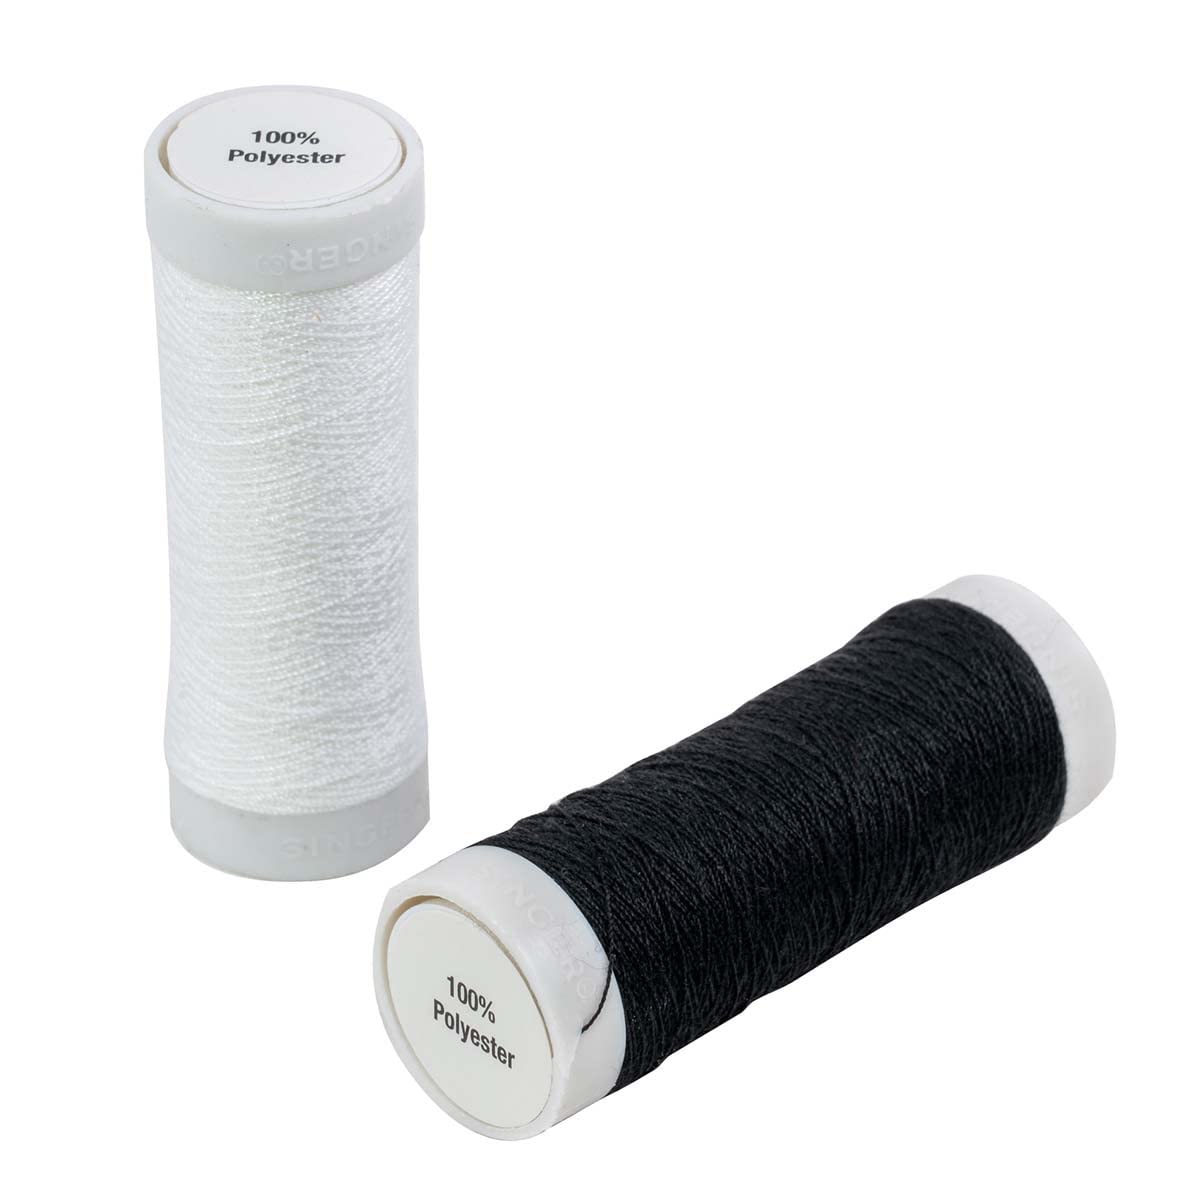 SINGER 60450 Hand Sewing Polyester Thread, 150-Yards each, Black & White